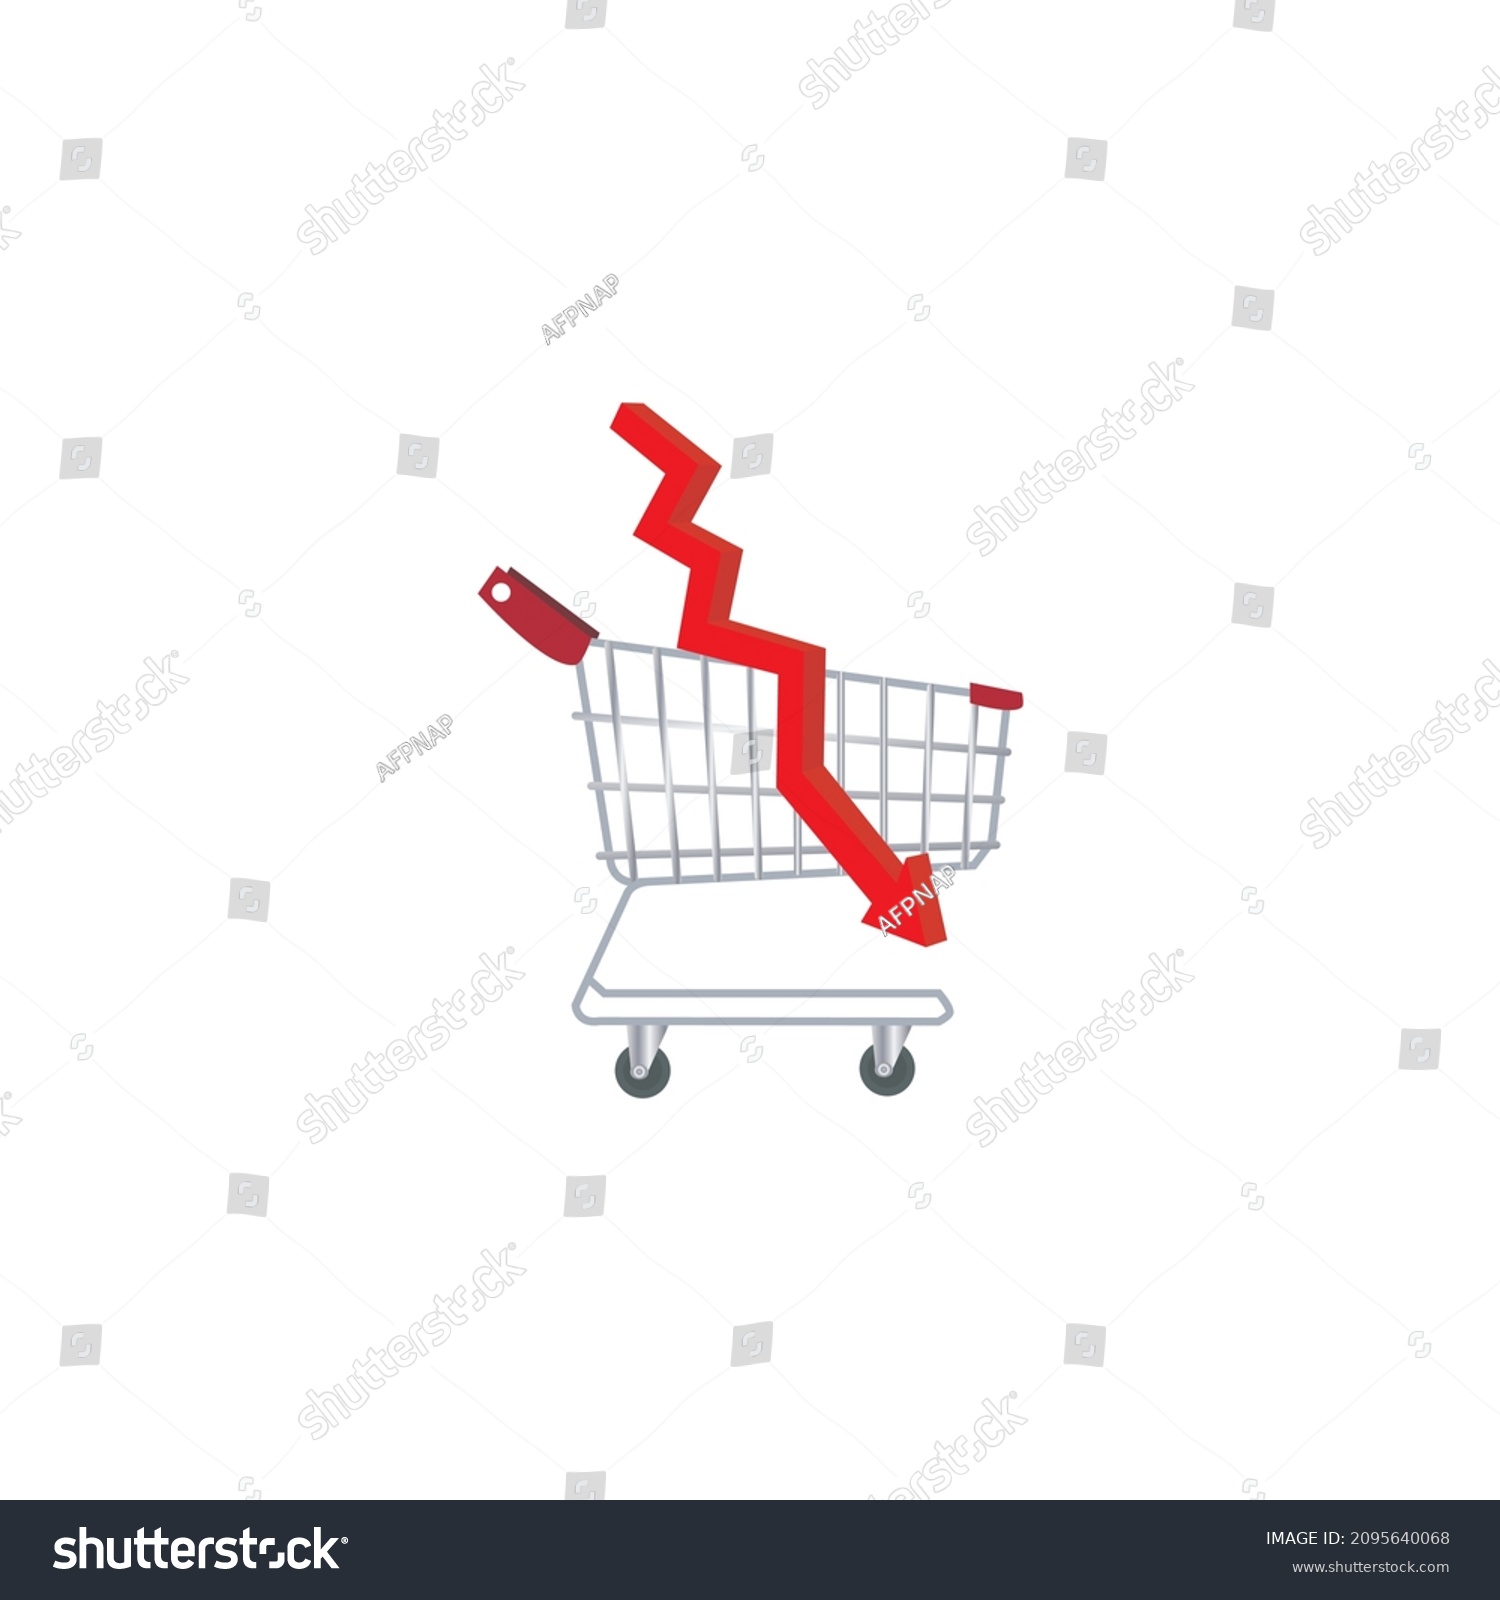 SVG of Buy on the dip, purchase stock when price drop, trader signal to invest, make profit from market collapse concept, smart businessman investor buy stock with down arrow graph in shopping cart. svg